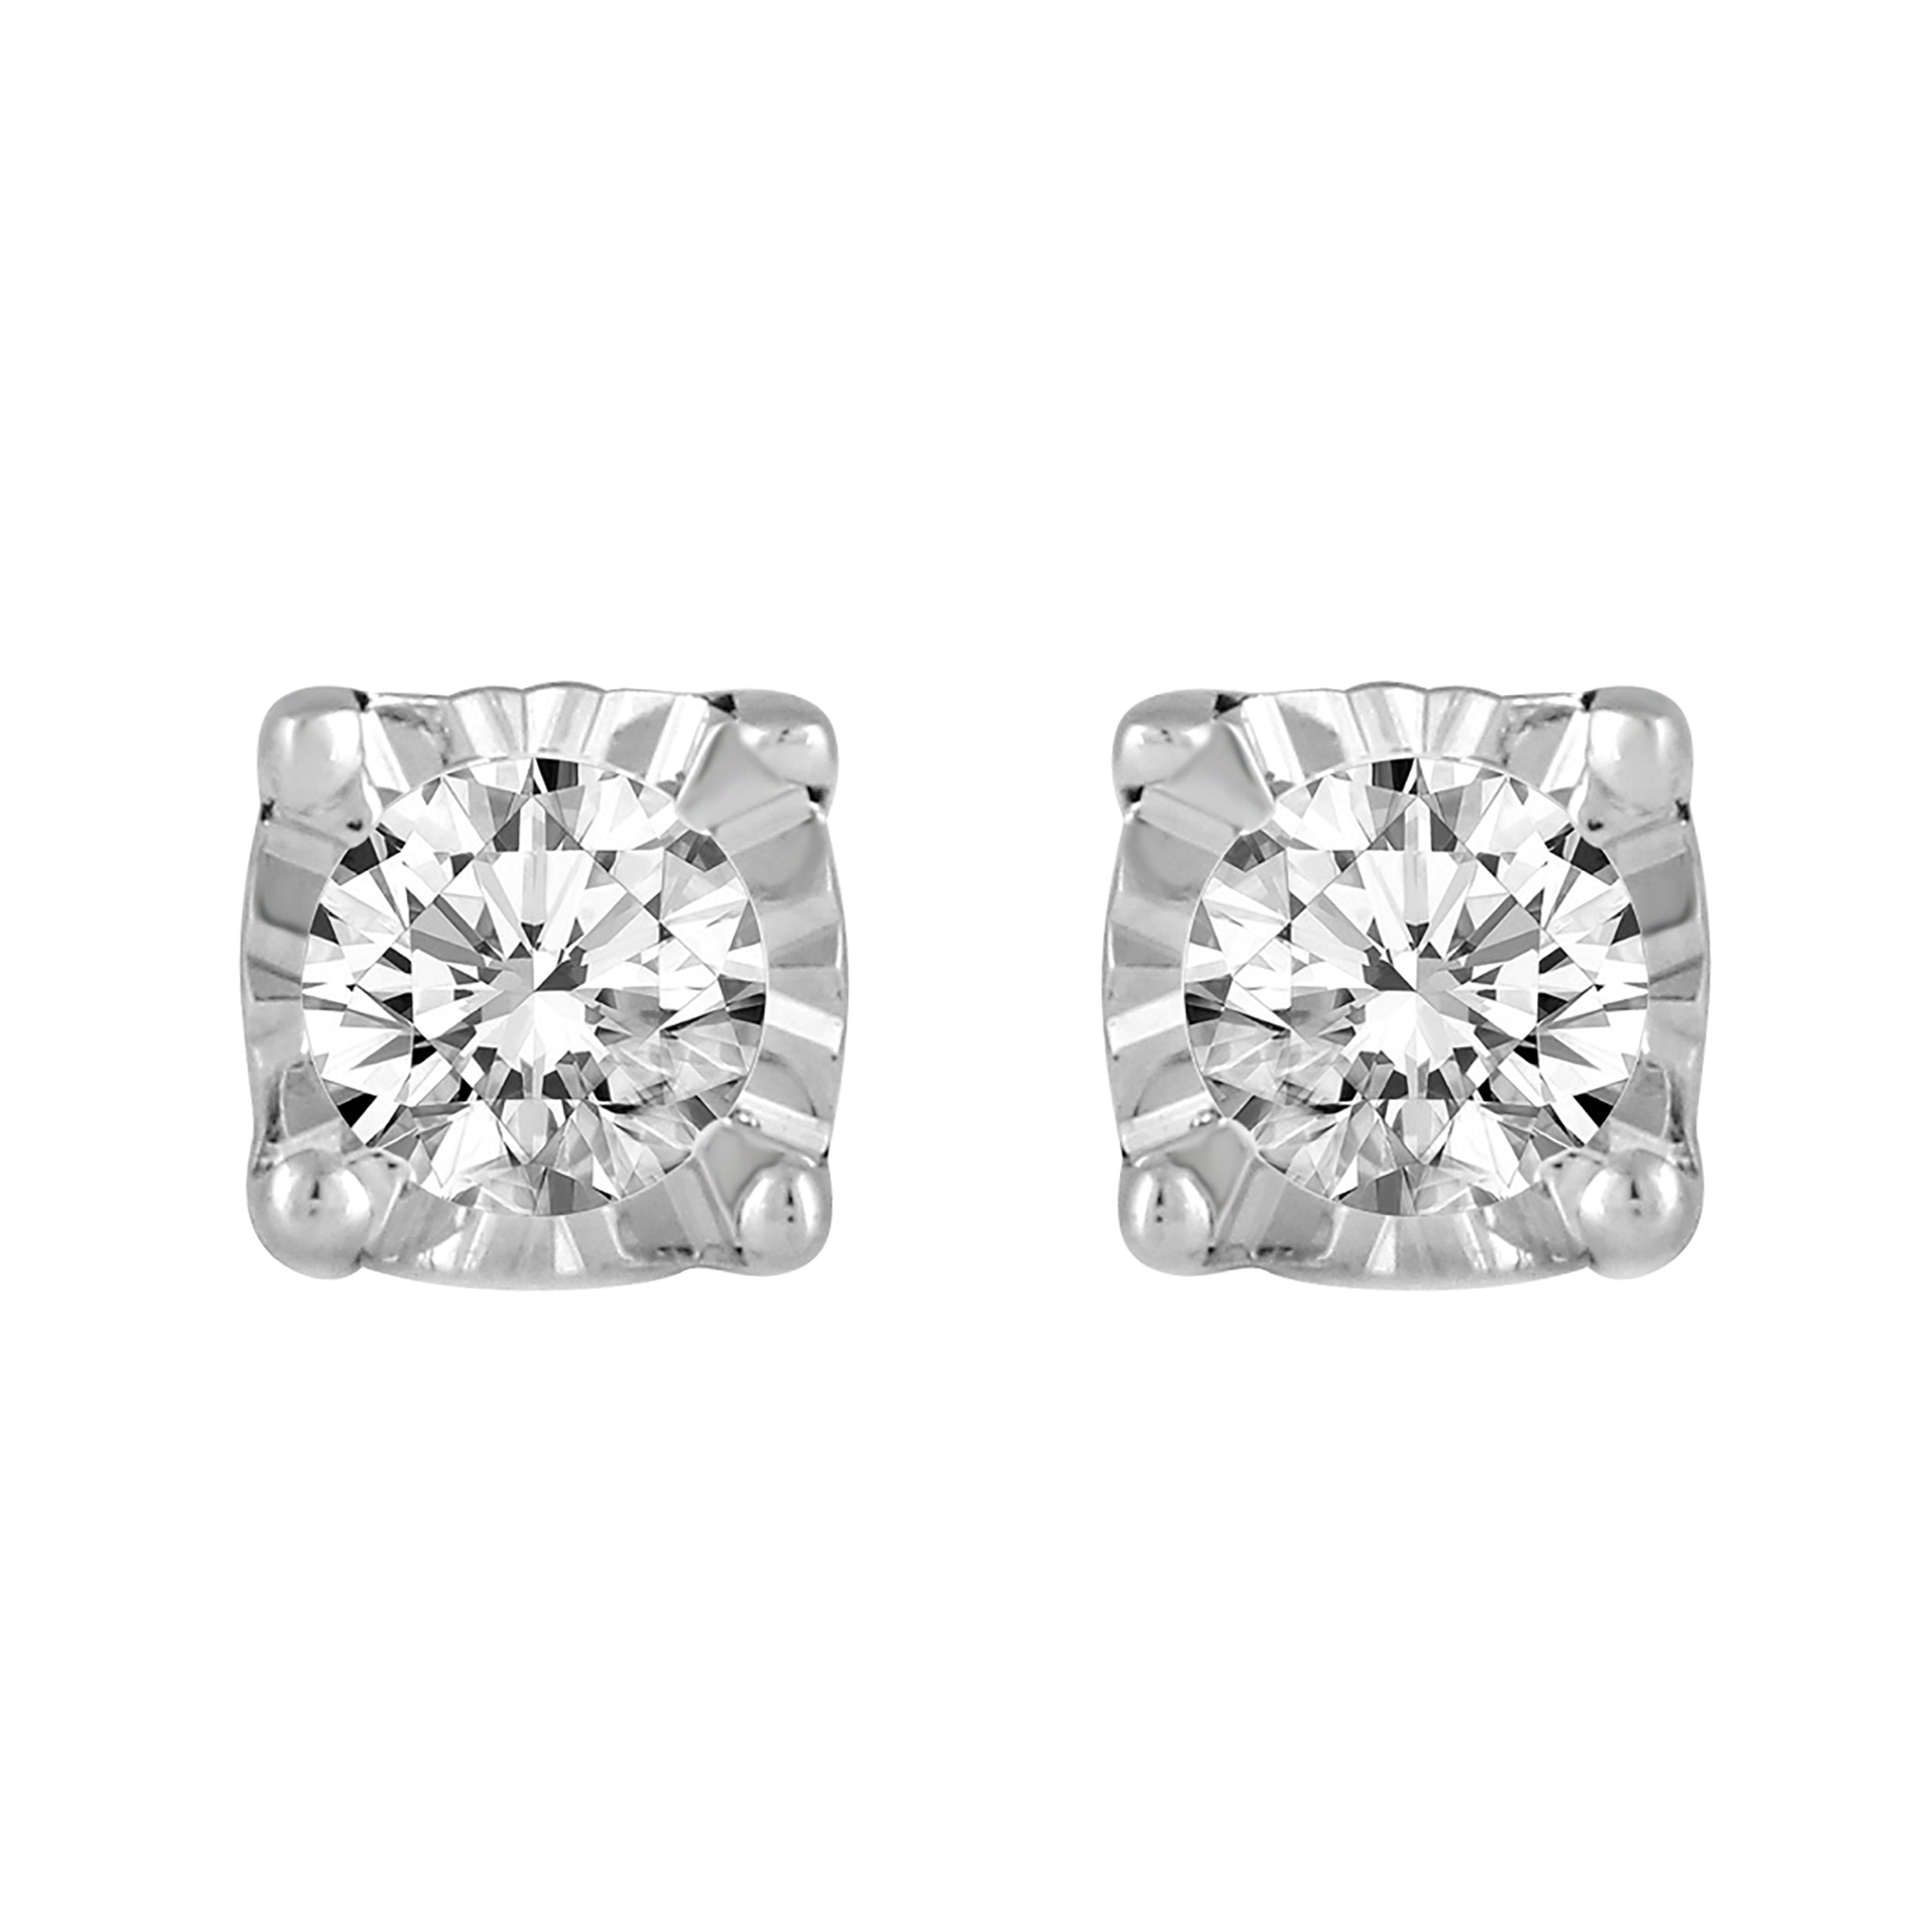 1/10ct TW to 1/4ct TW Natural Diamond Stud Earrings Set in Sterling Si ...